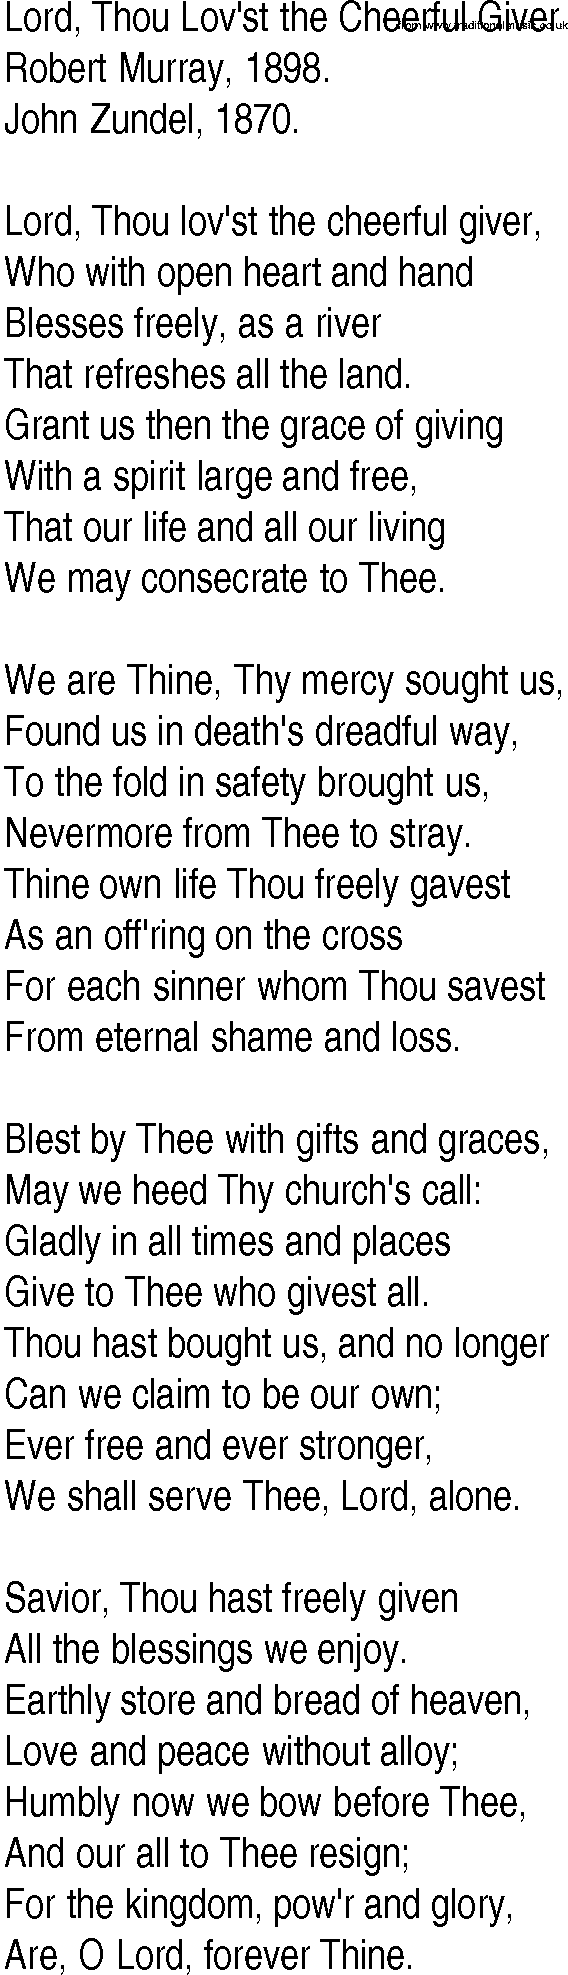 Hymn and Gospel Song: Lord, Thou Lov'st the Cheerful Giver by Robert Murray lyrics